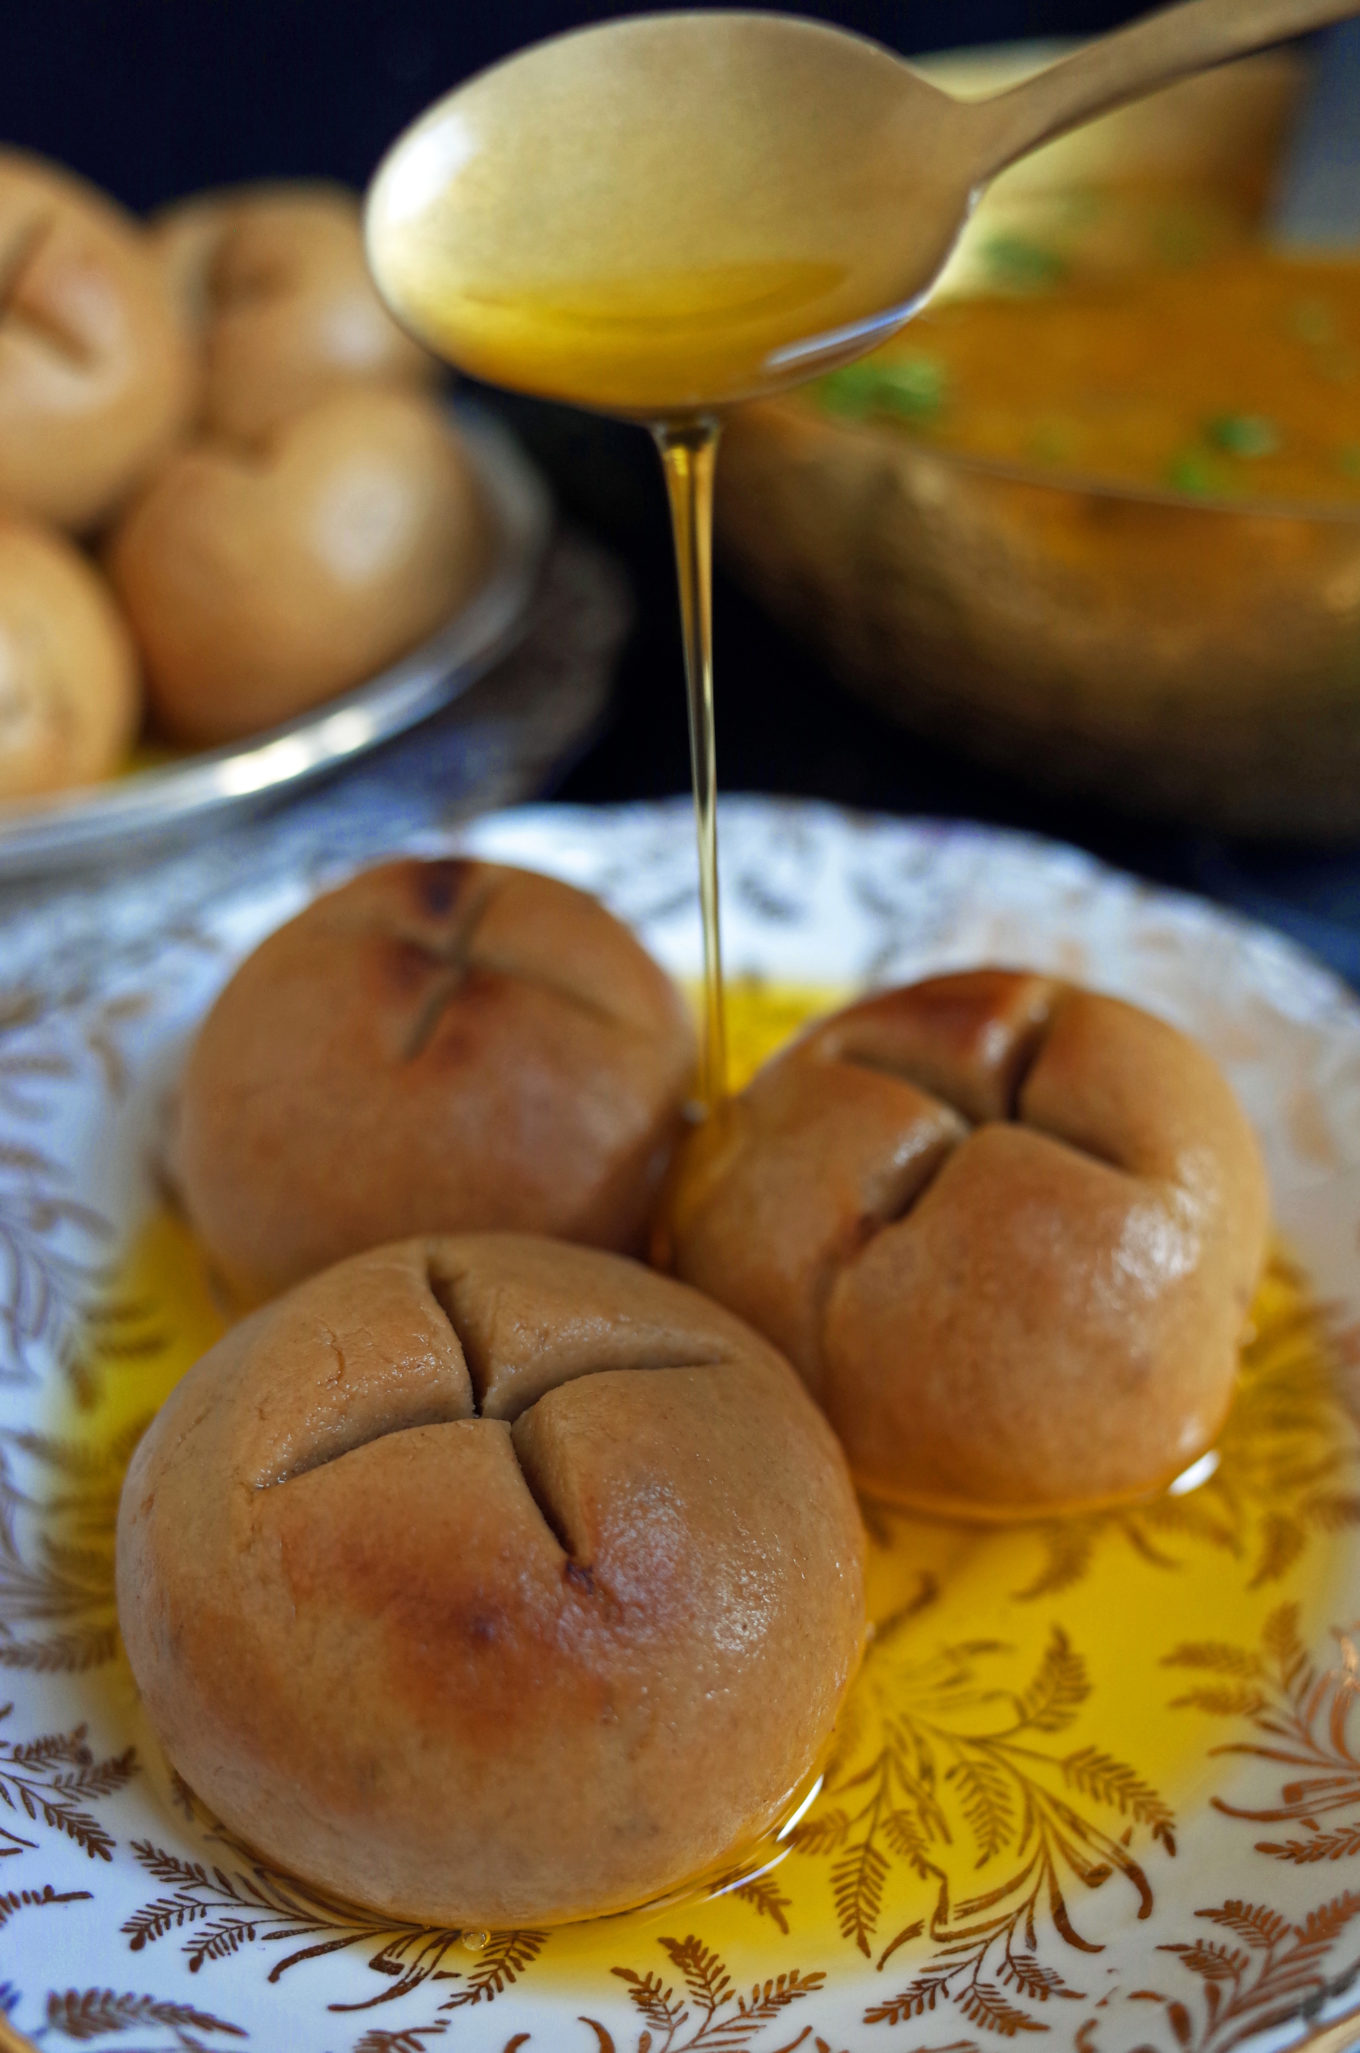 Rajasthani Bati - Baked Indian Bread Rolls to go with Dal